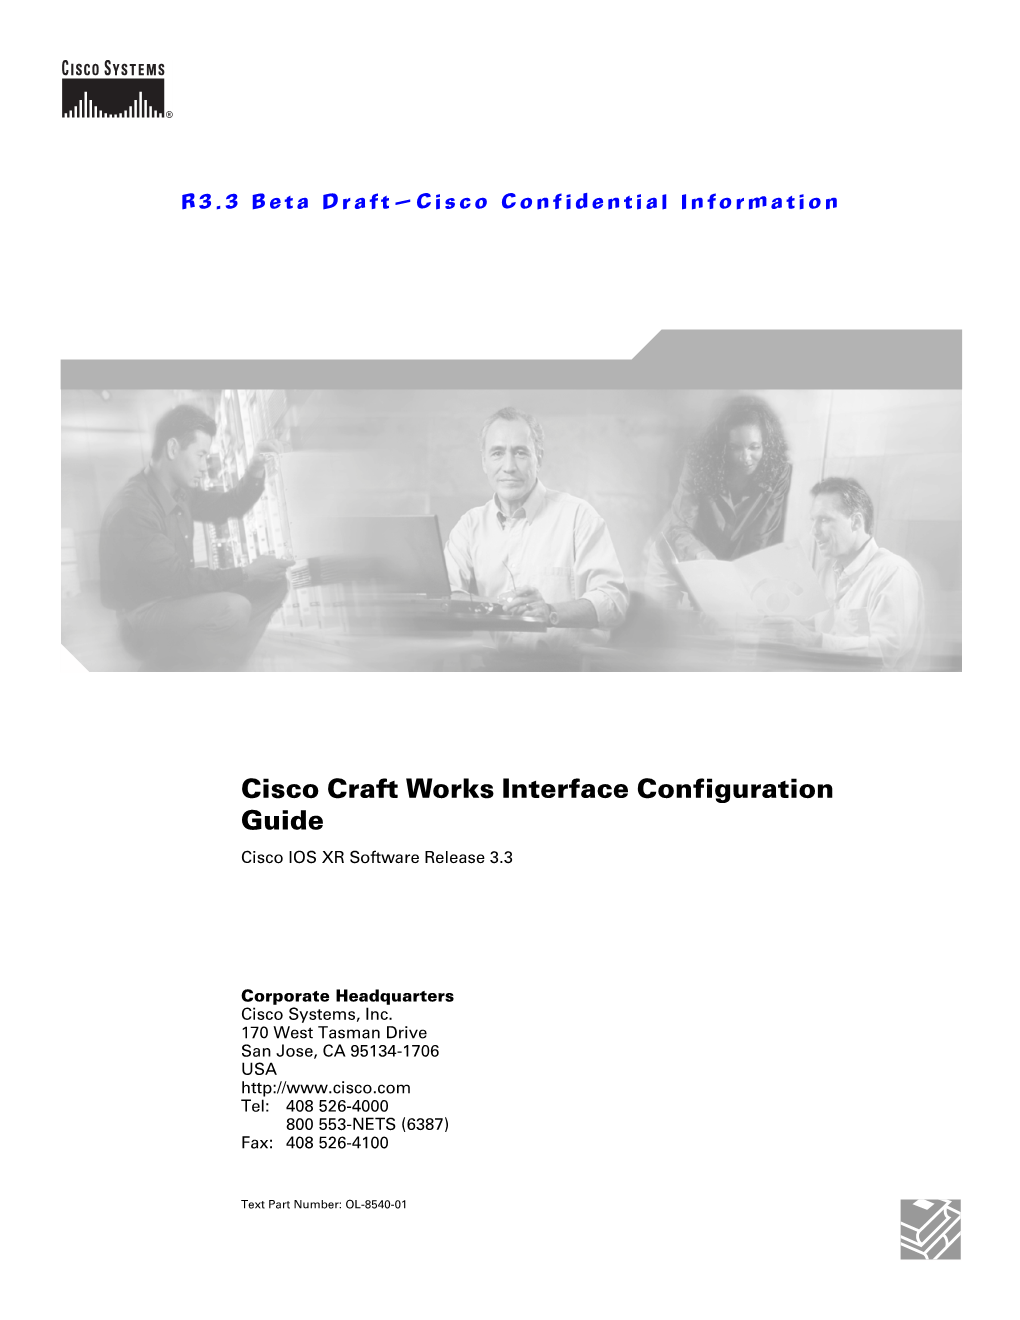 Cisco Craft Works Interface Configuration Guide Cisco IOS XR Software Release 3.3